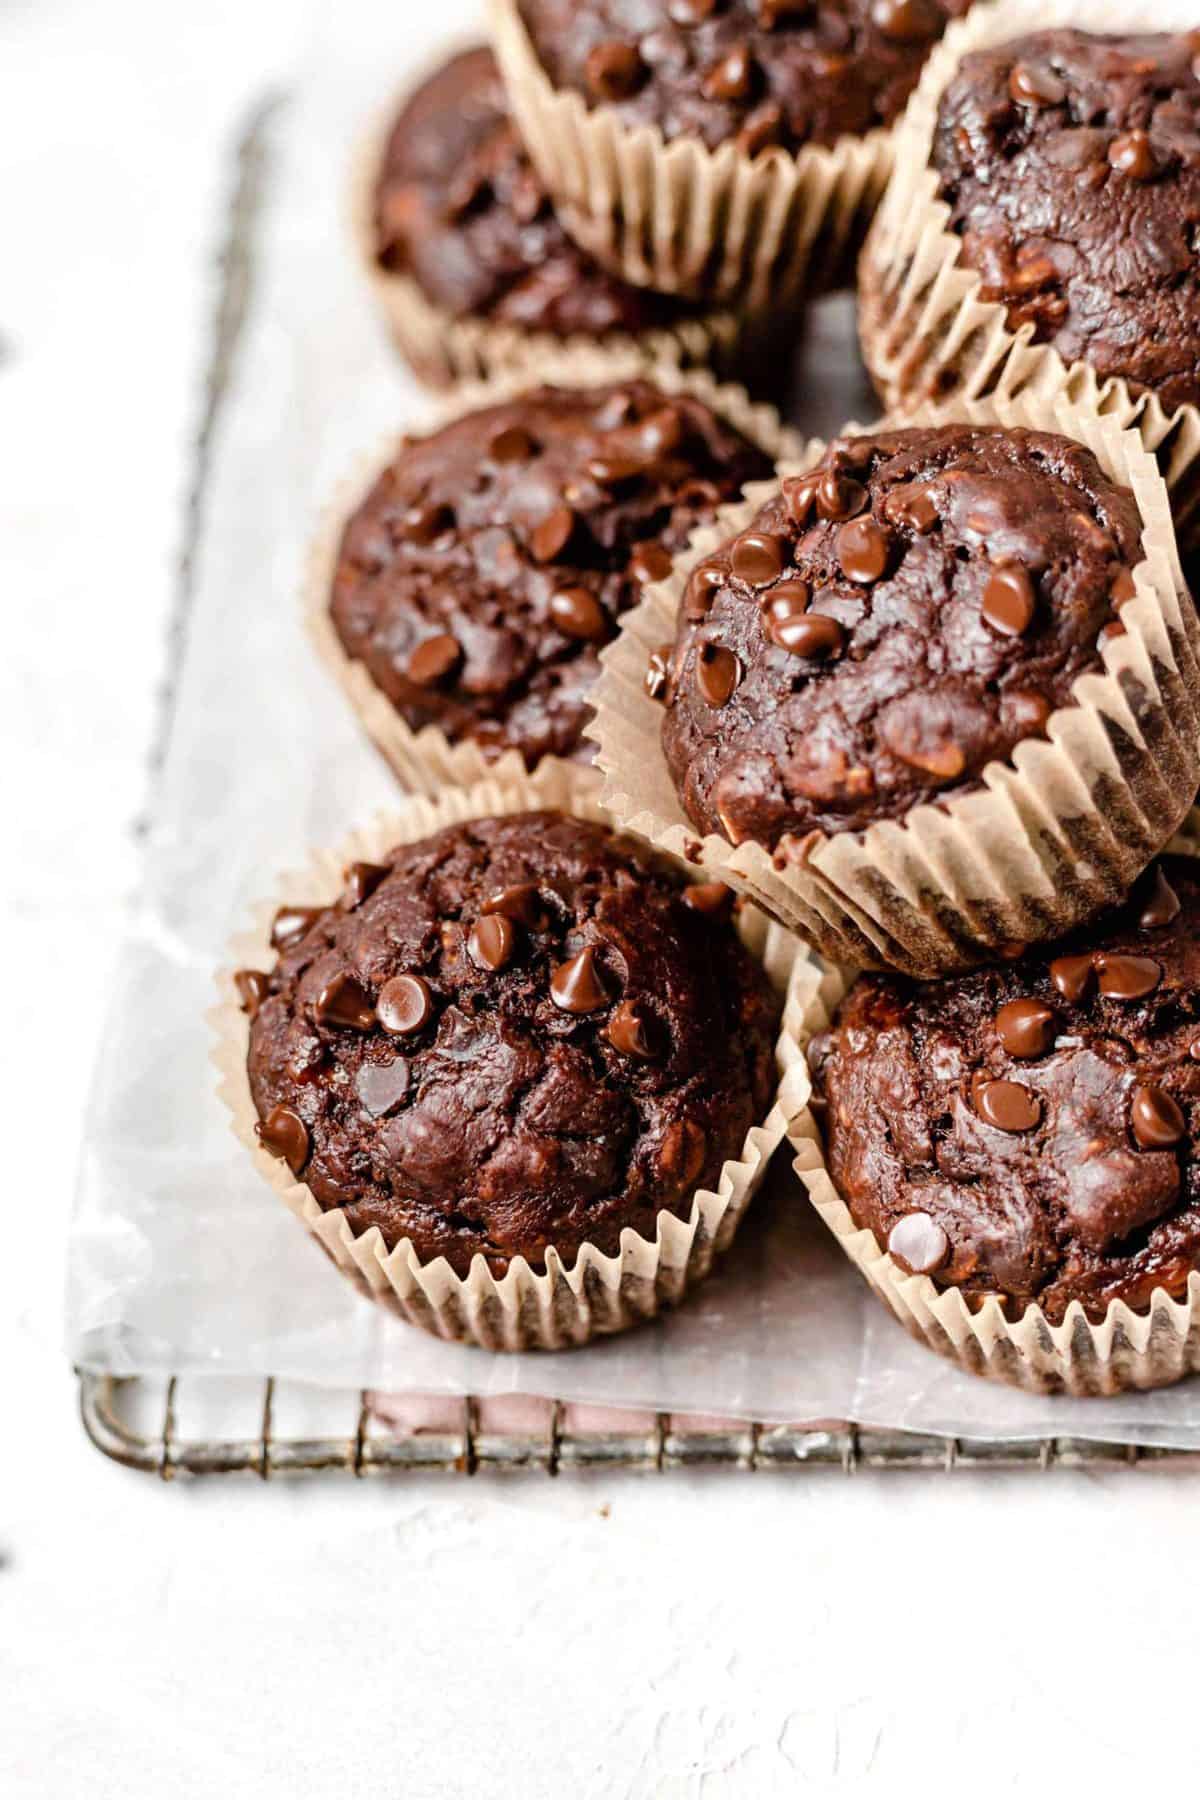 Healthy Chocolate Peanut Butter Banana Muffins - Baked Ambrosia